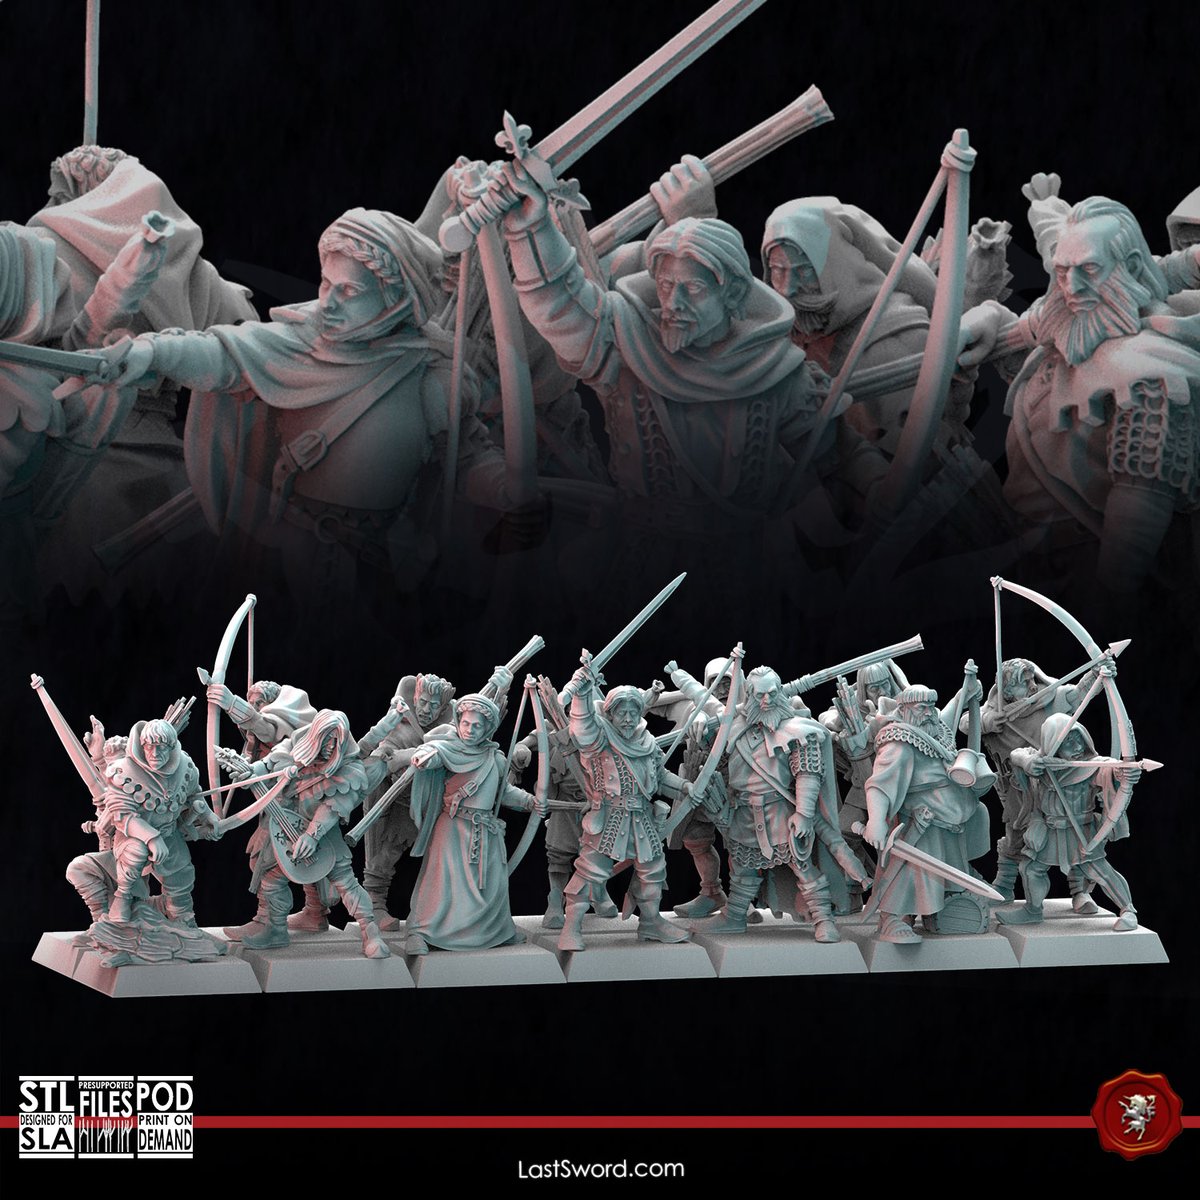 There is only one way to get through the forbidden forests of Neverra, by paying a good sum of money to Robin and the Hoodedmen.
You can already find them in our webshop!
lastsword.com/product/miniat…
-
#bretonnia #bretonnian #citiesofsigmar #freeguild #9thage #ninthage #the9thage #kow